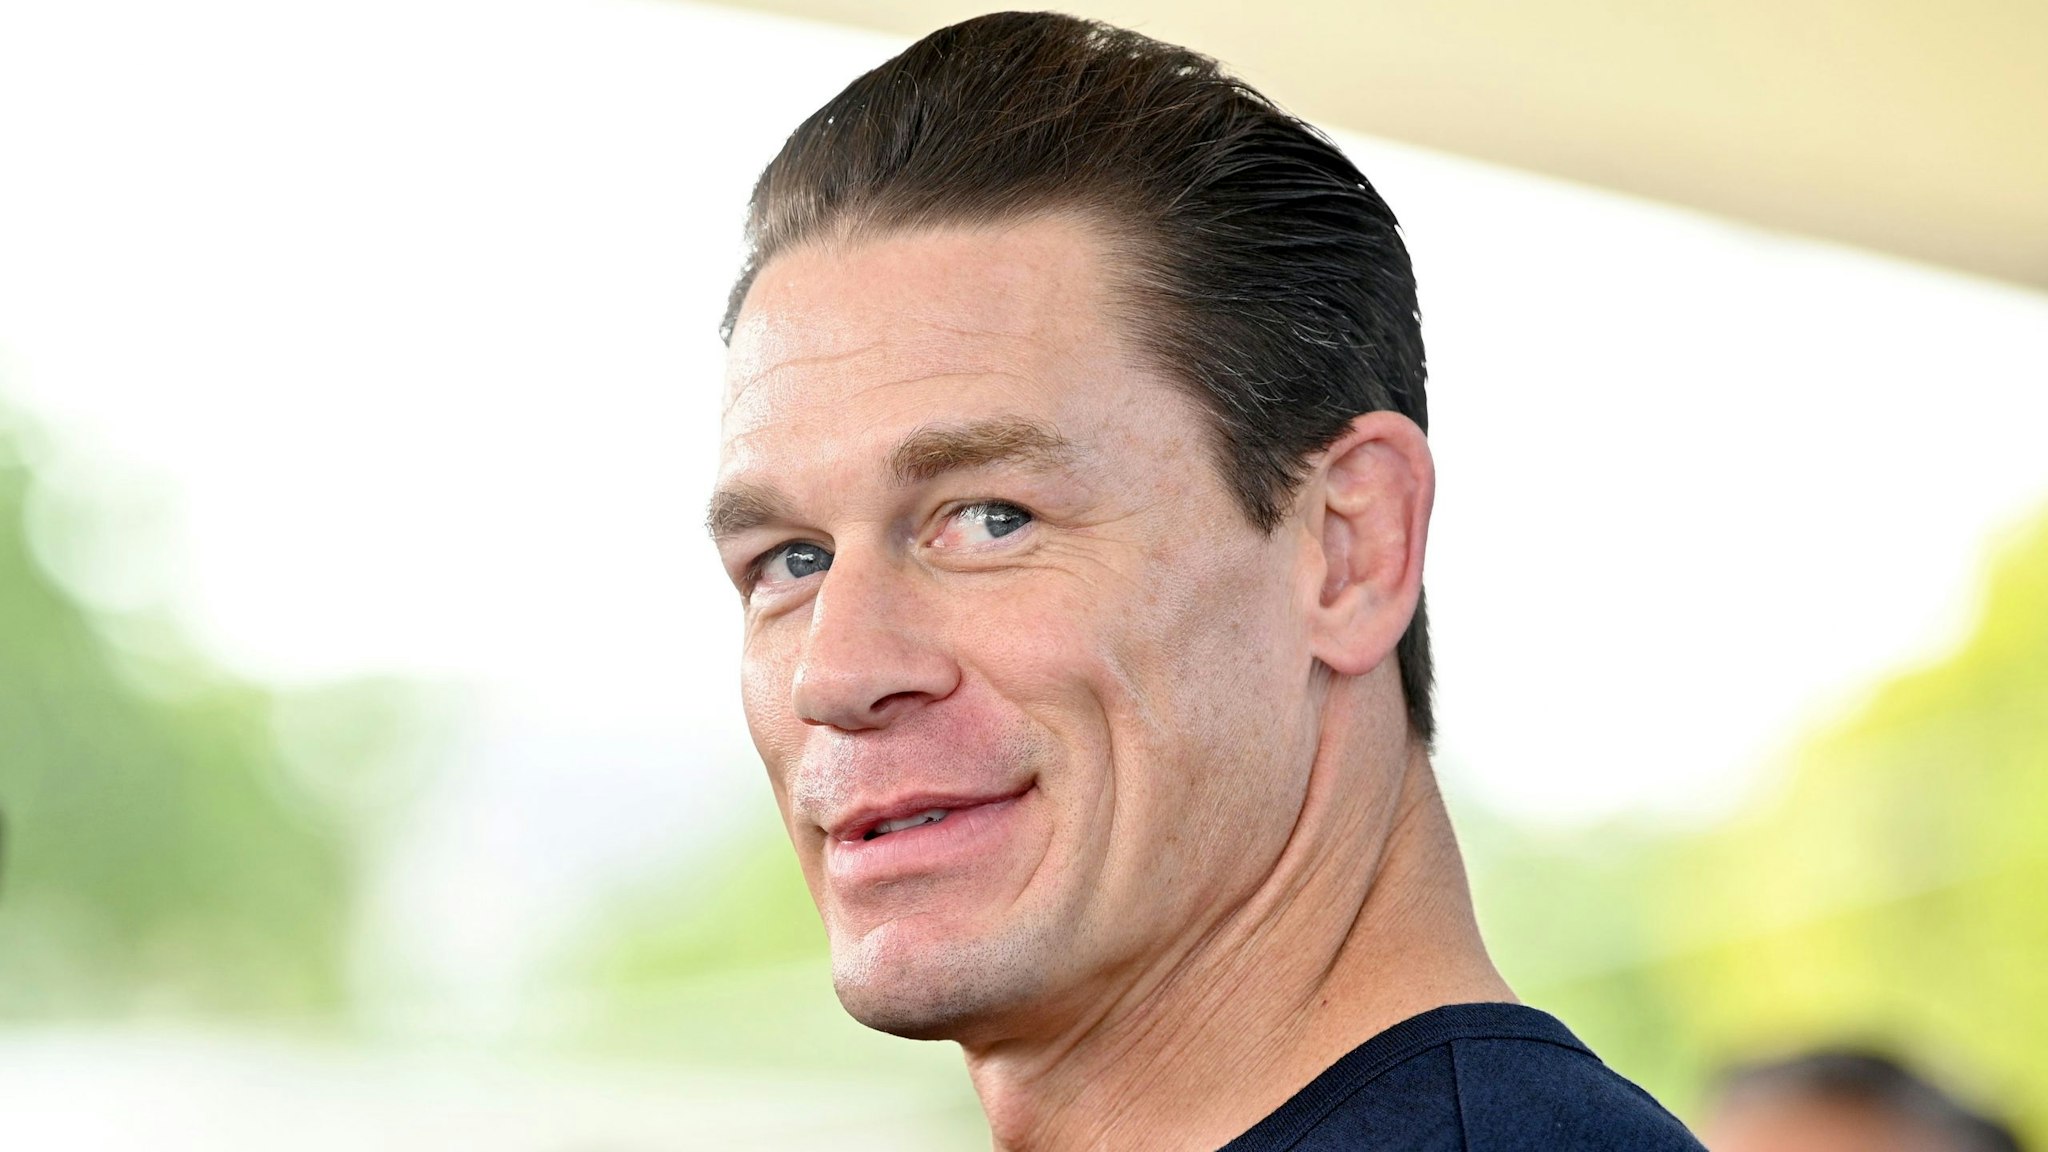 MIAMI, FLORIDA - JANUARY 31: John Cena attends "The Road to F9" Global Fan Extravaganza at Maurice A. Ferre Park on January 31, 2020 in Miami, Florida.